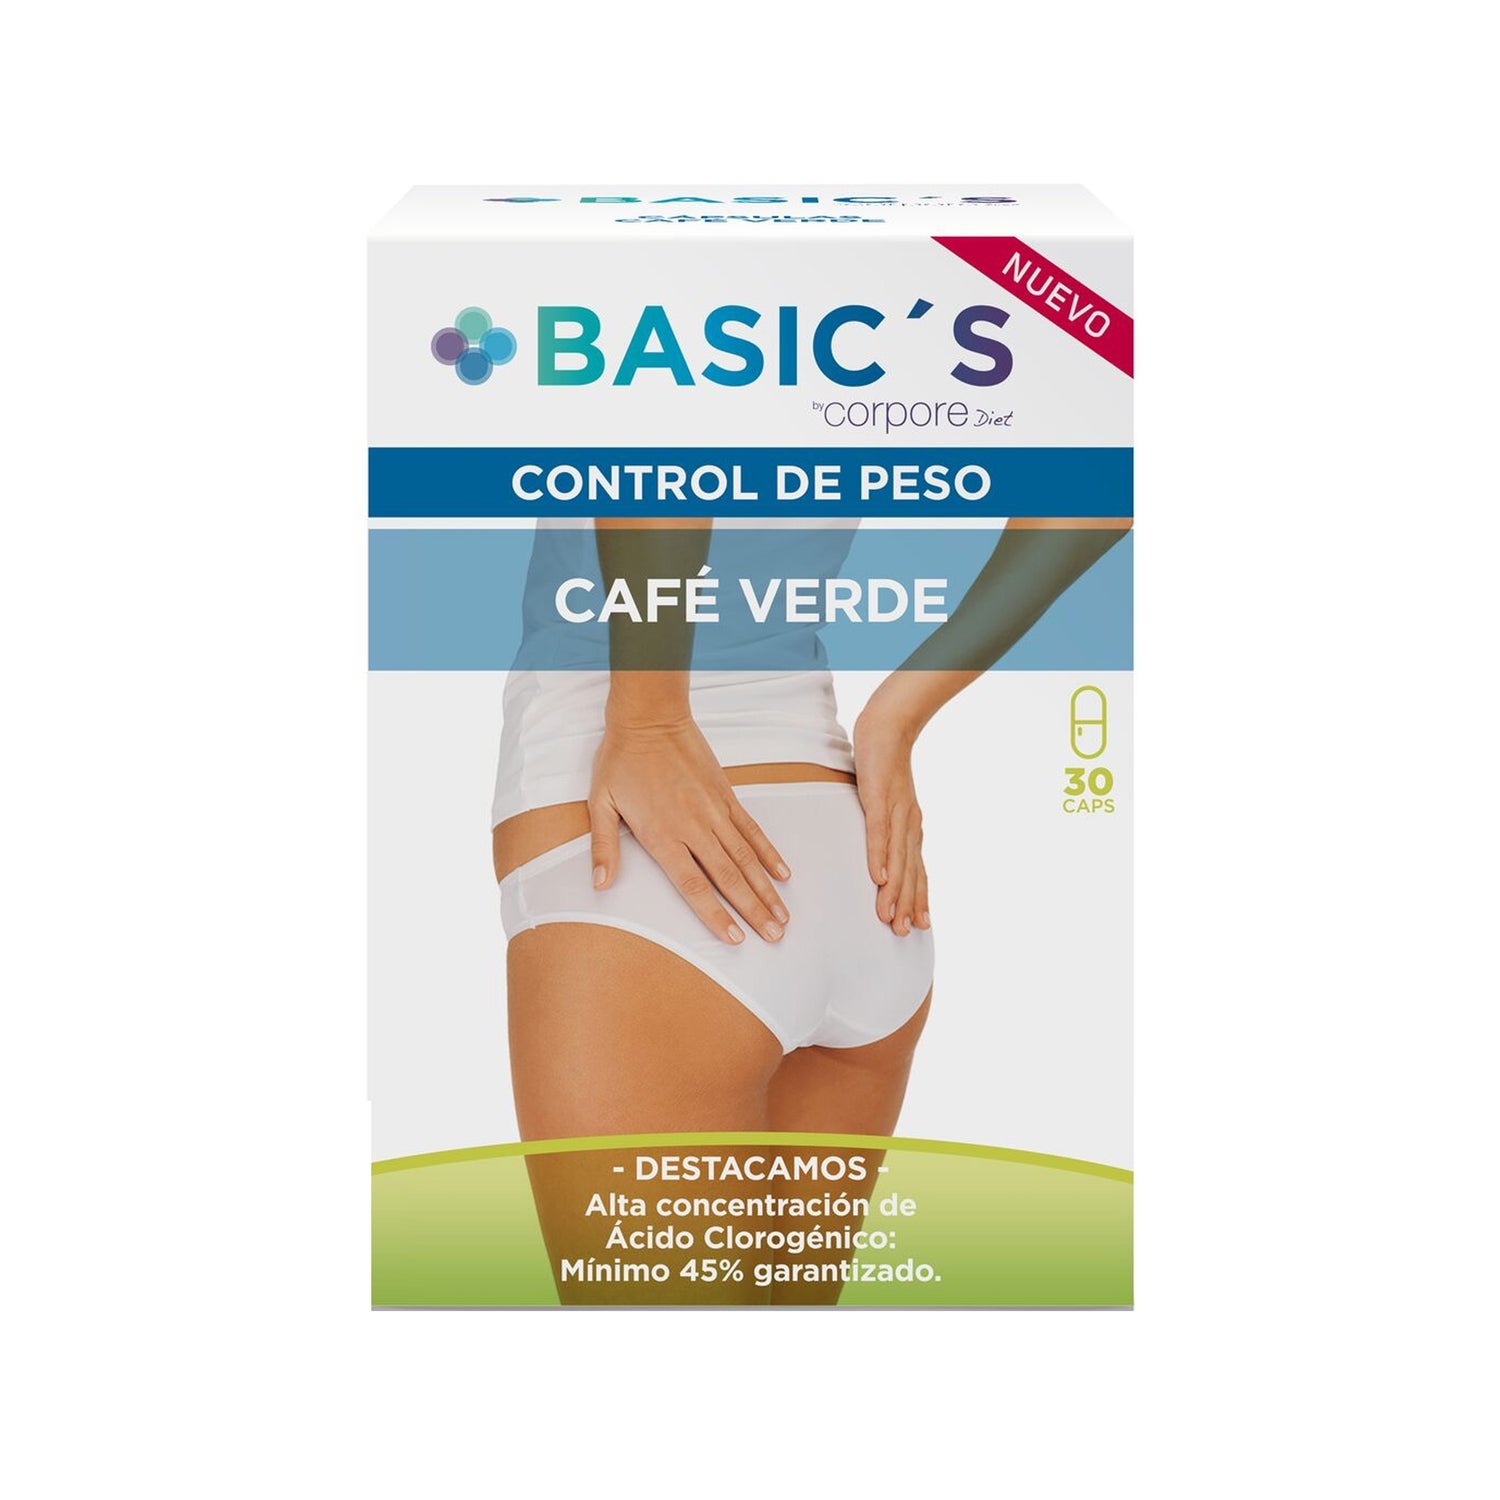 corpore basic s caf verde 30c ps